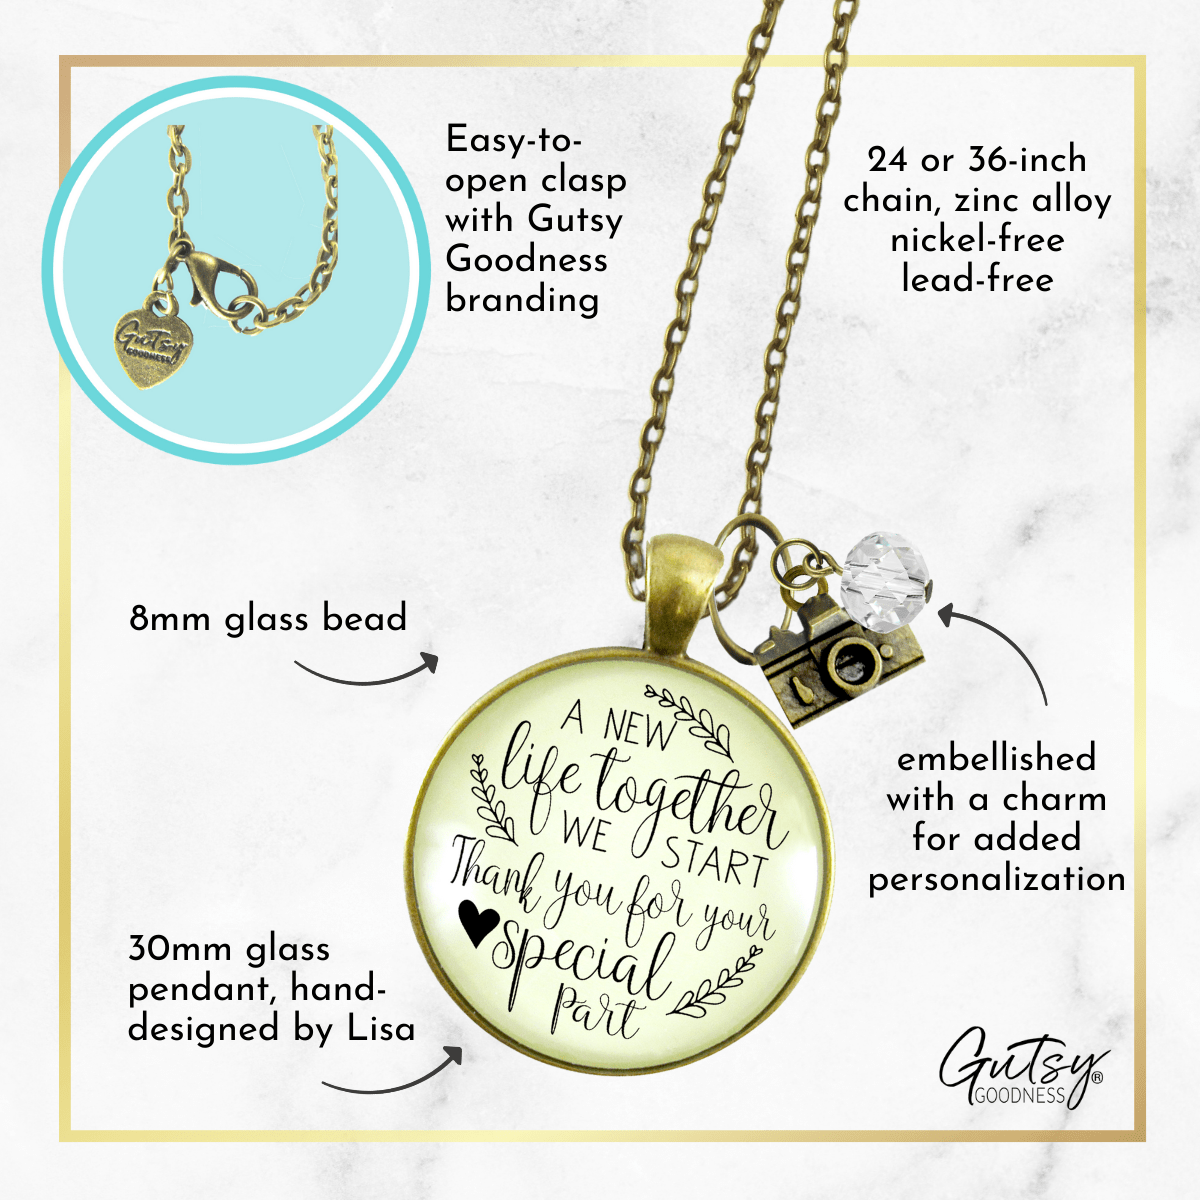 Gutsy Goodness Wedding Photographer Gift Necklace A New Life Camera Charm Thank You - Gutsy Goodness Handmade Jewelry;Wedding Photographer Gift Necklace A New Life Camera Charm Thank You - Gutsy Goodness Handmade Jewelry Gifts